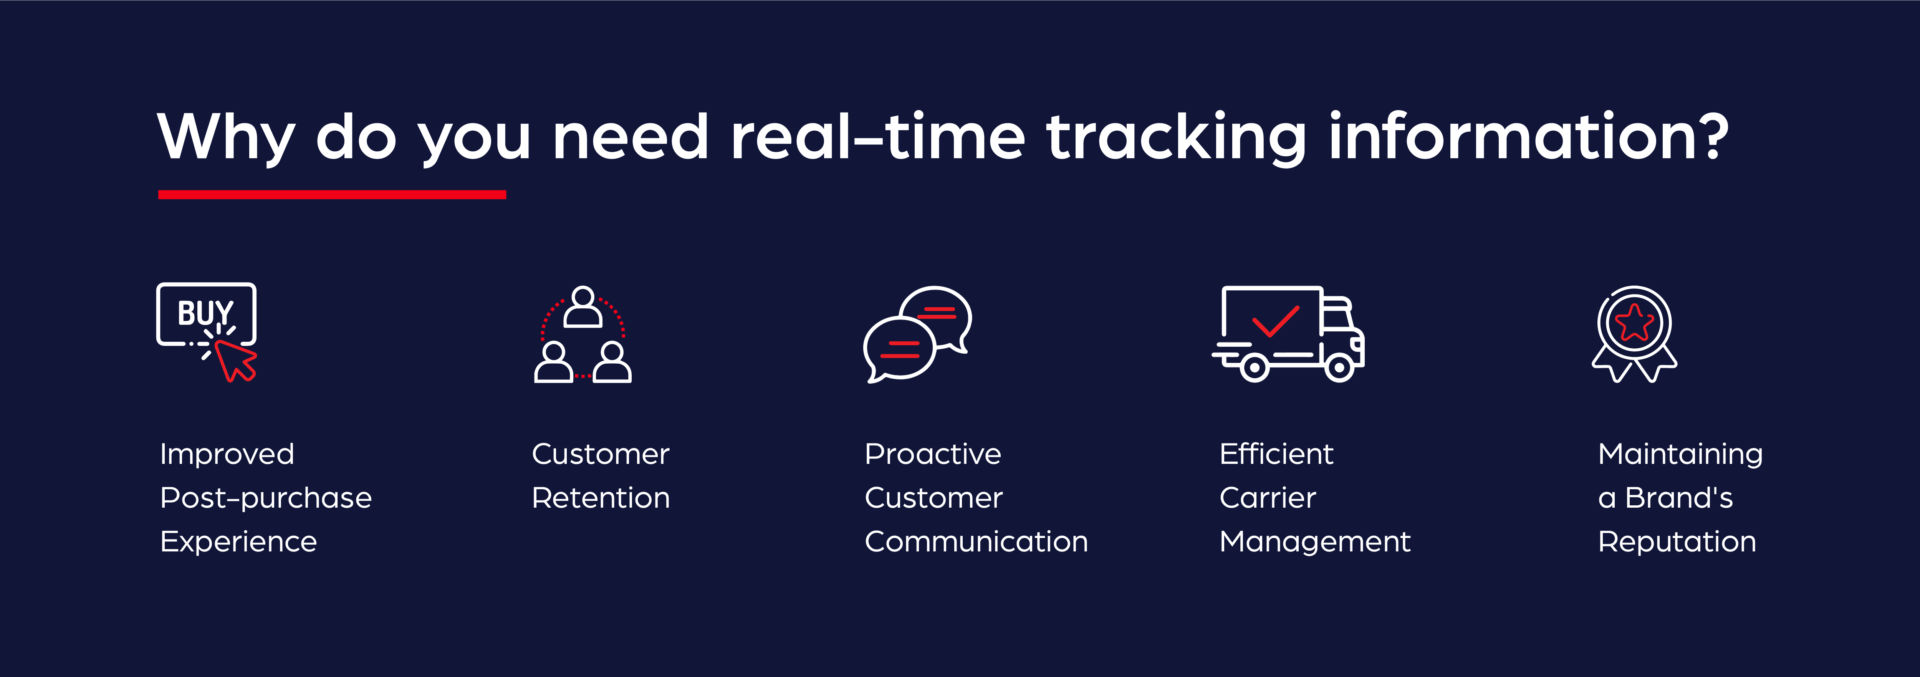 Why do you need real time tracking info